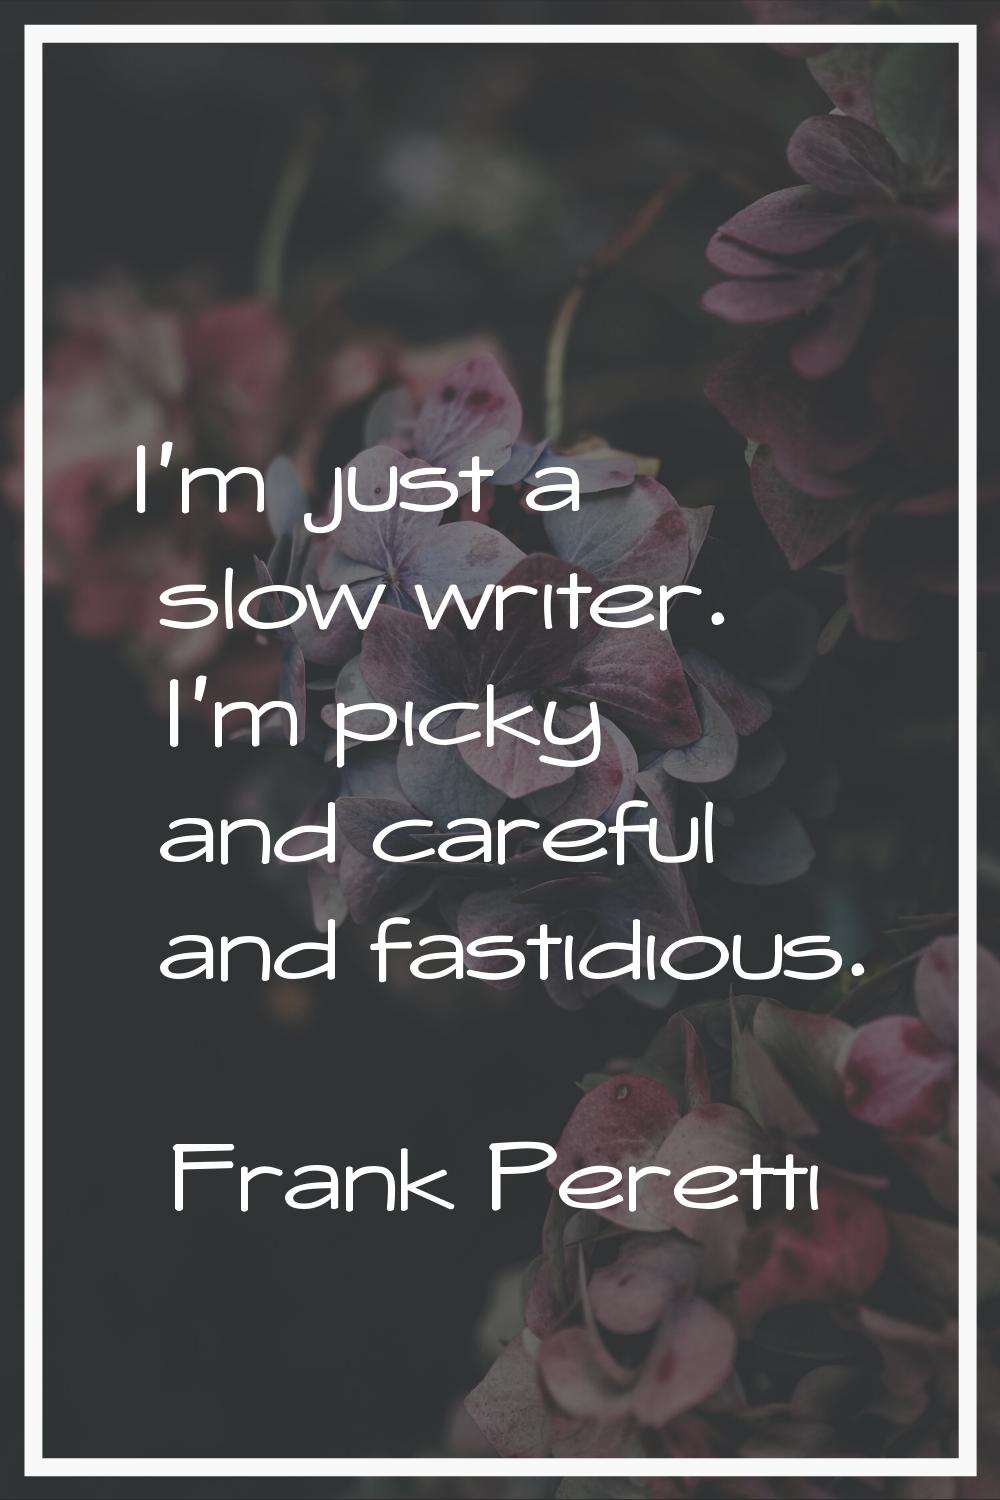 I'm just a slow writer. I'm picky and careful and fastidious.